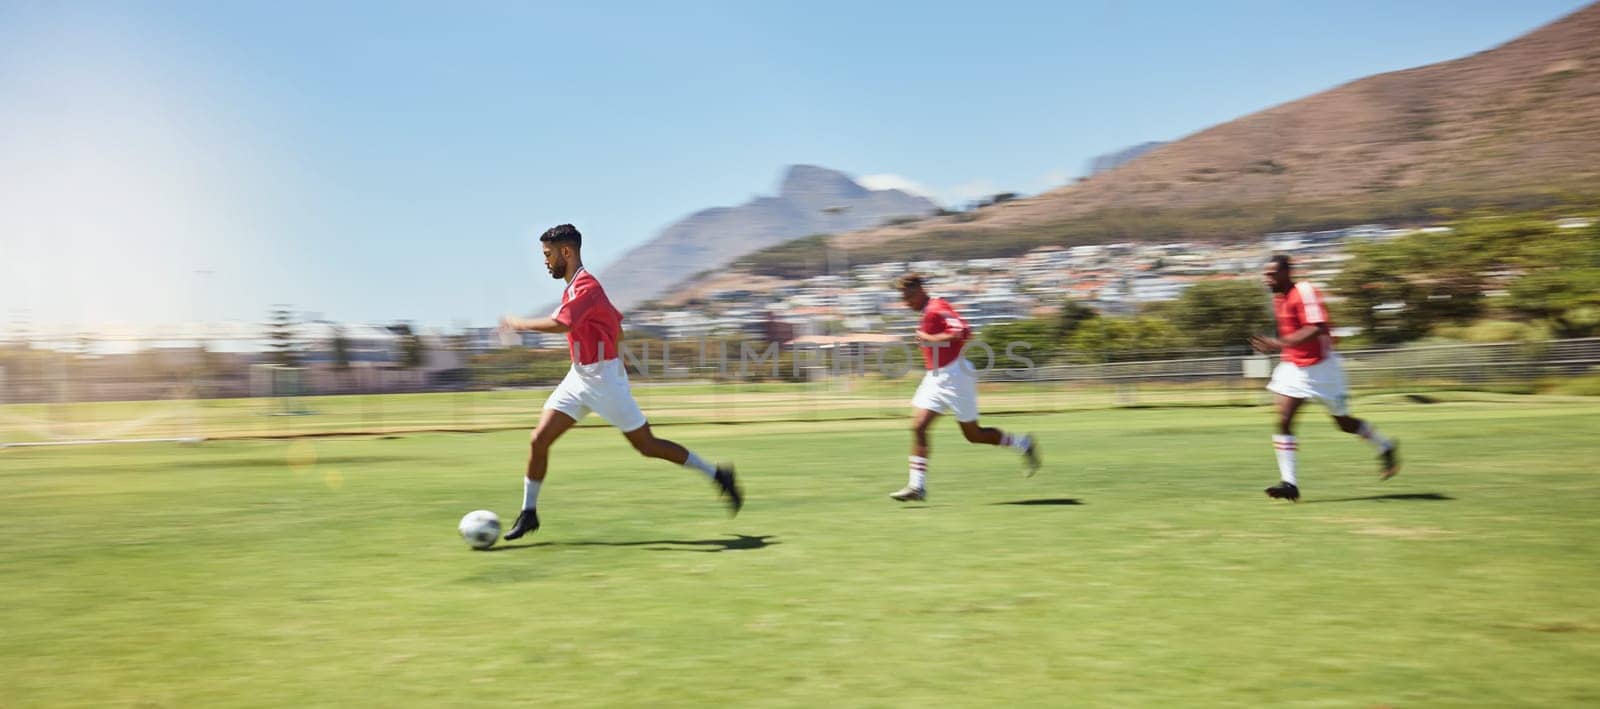 Soccer player, running and soccer ball team sports competition game, grass pitch and goals of winning score in South Africa. Motion blur professional athlete, football field action and outdoor energy by YuriArcurs